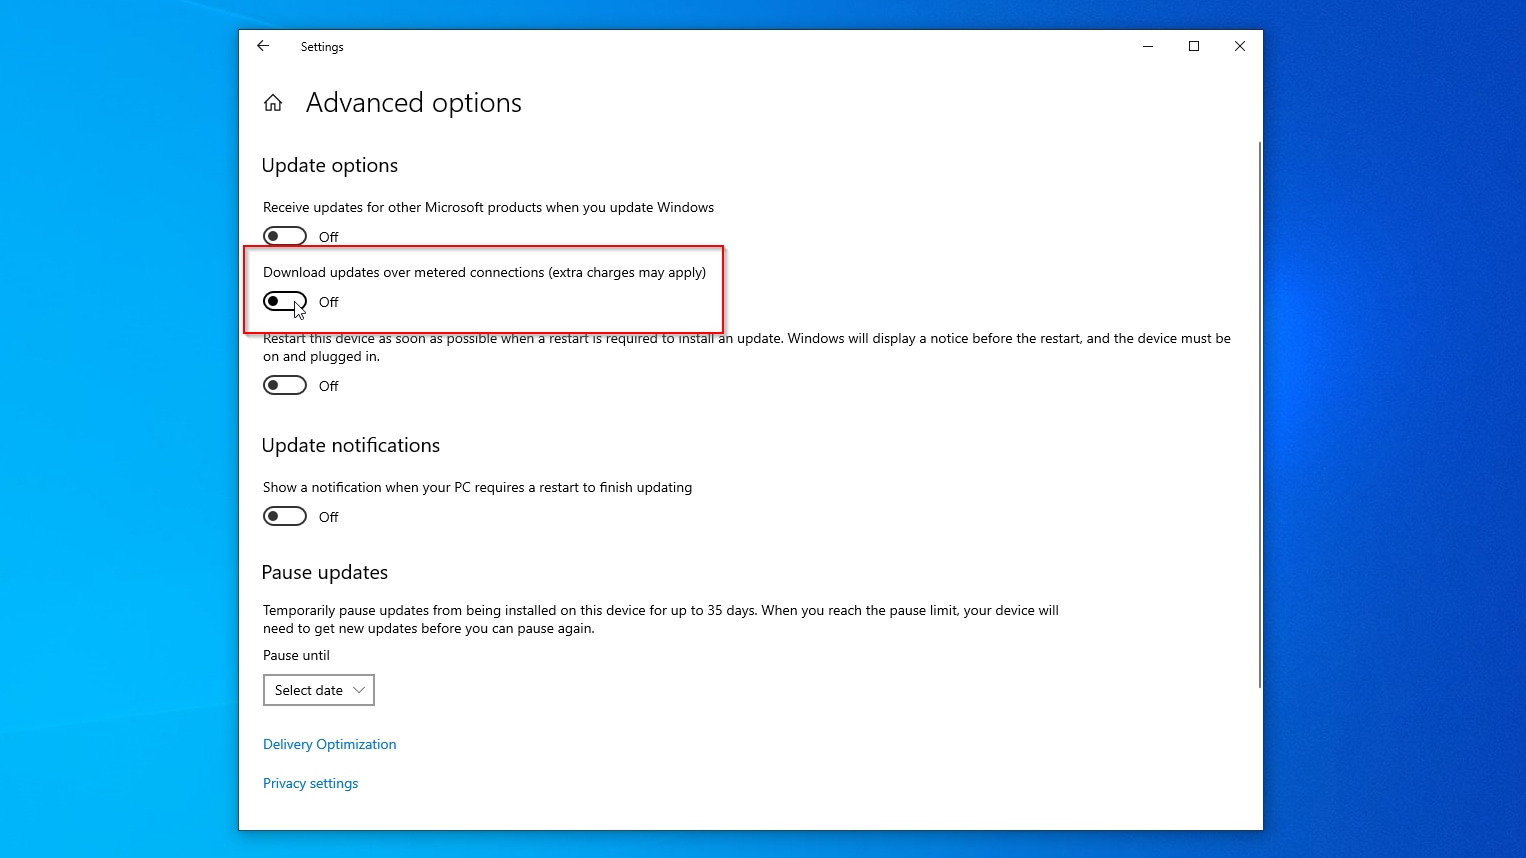 Windows Update Advanced Options Disabling Updates Over Metered Connections